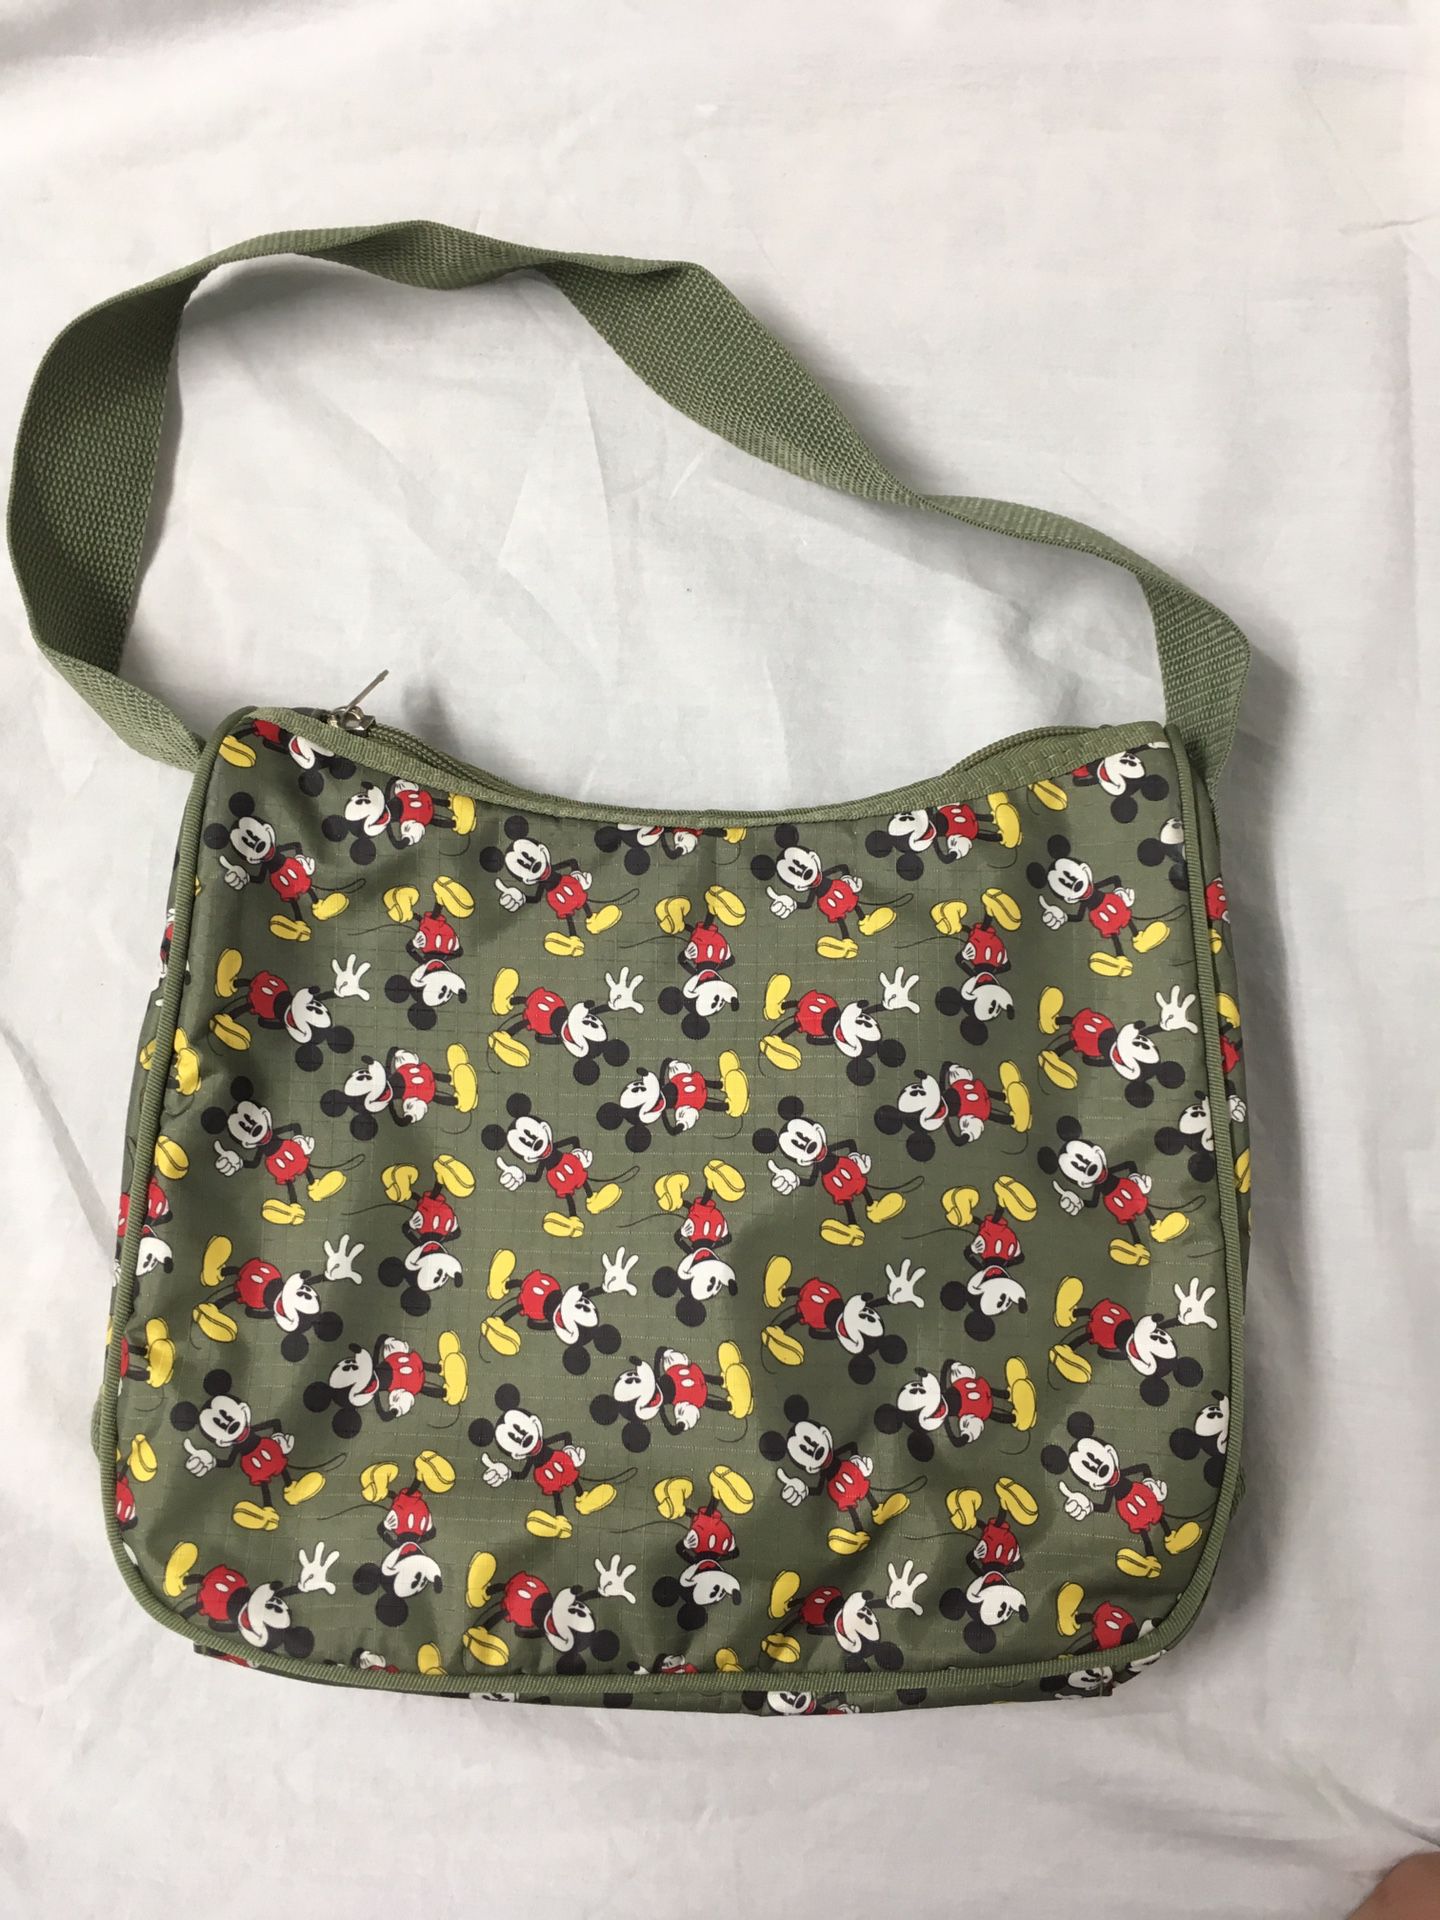 MICKEY MOUSE DISNEY PURSE, 9x11 inches, pocket and other storage inside purse